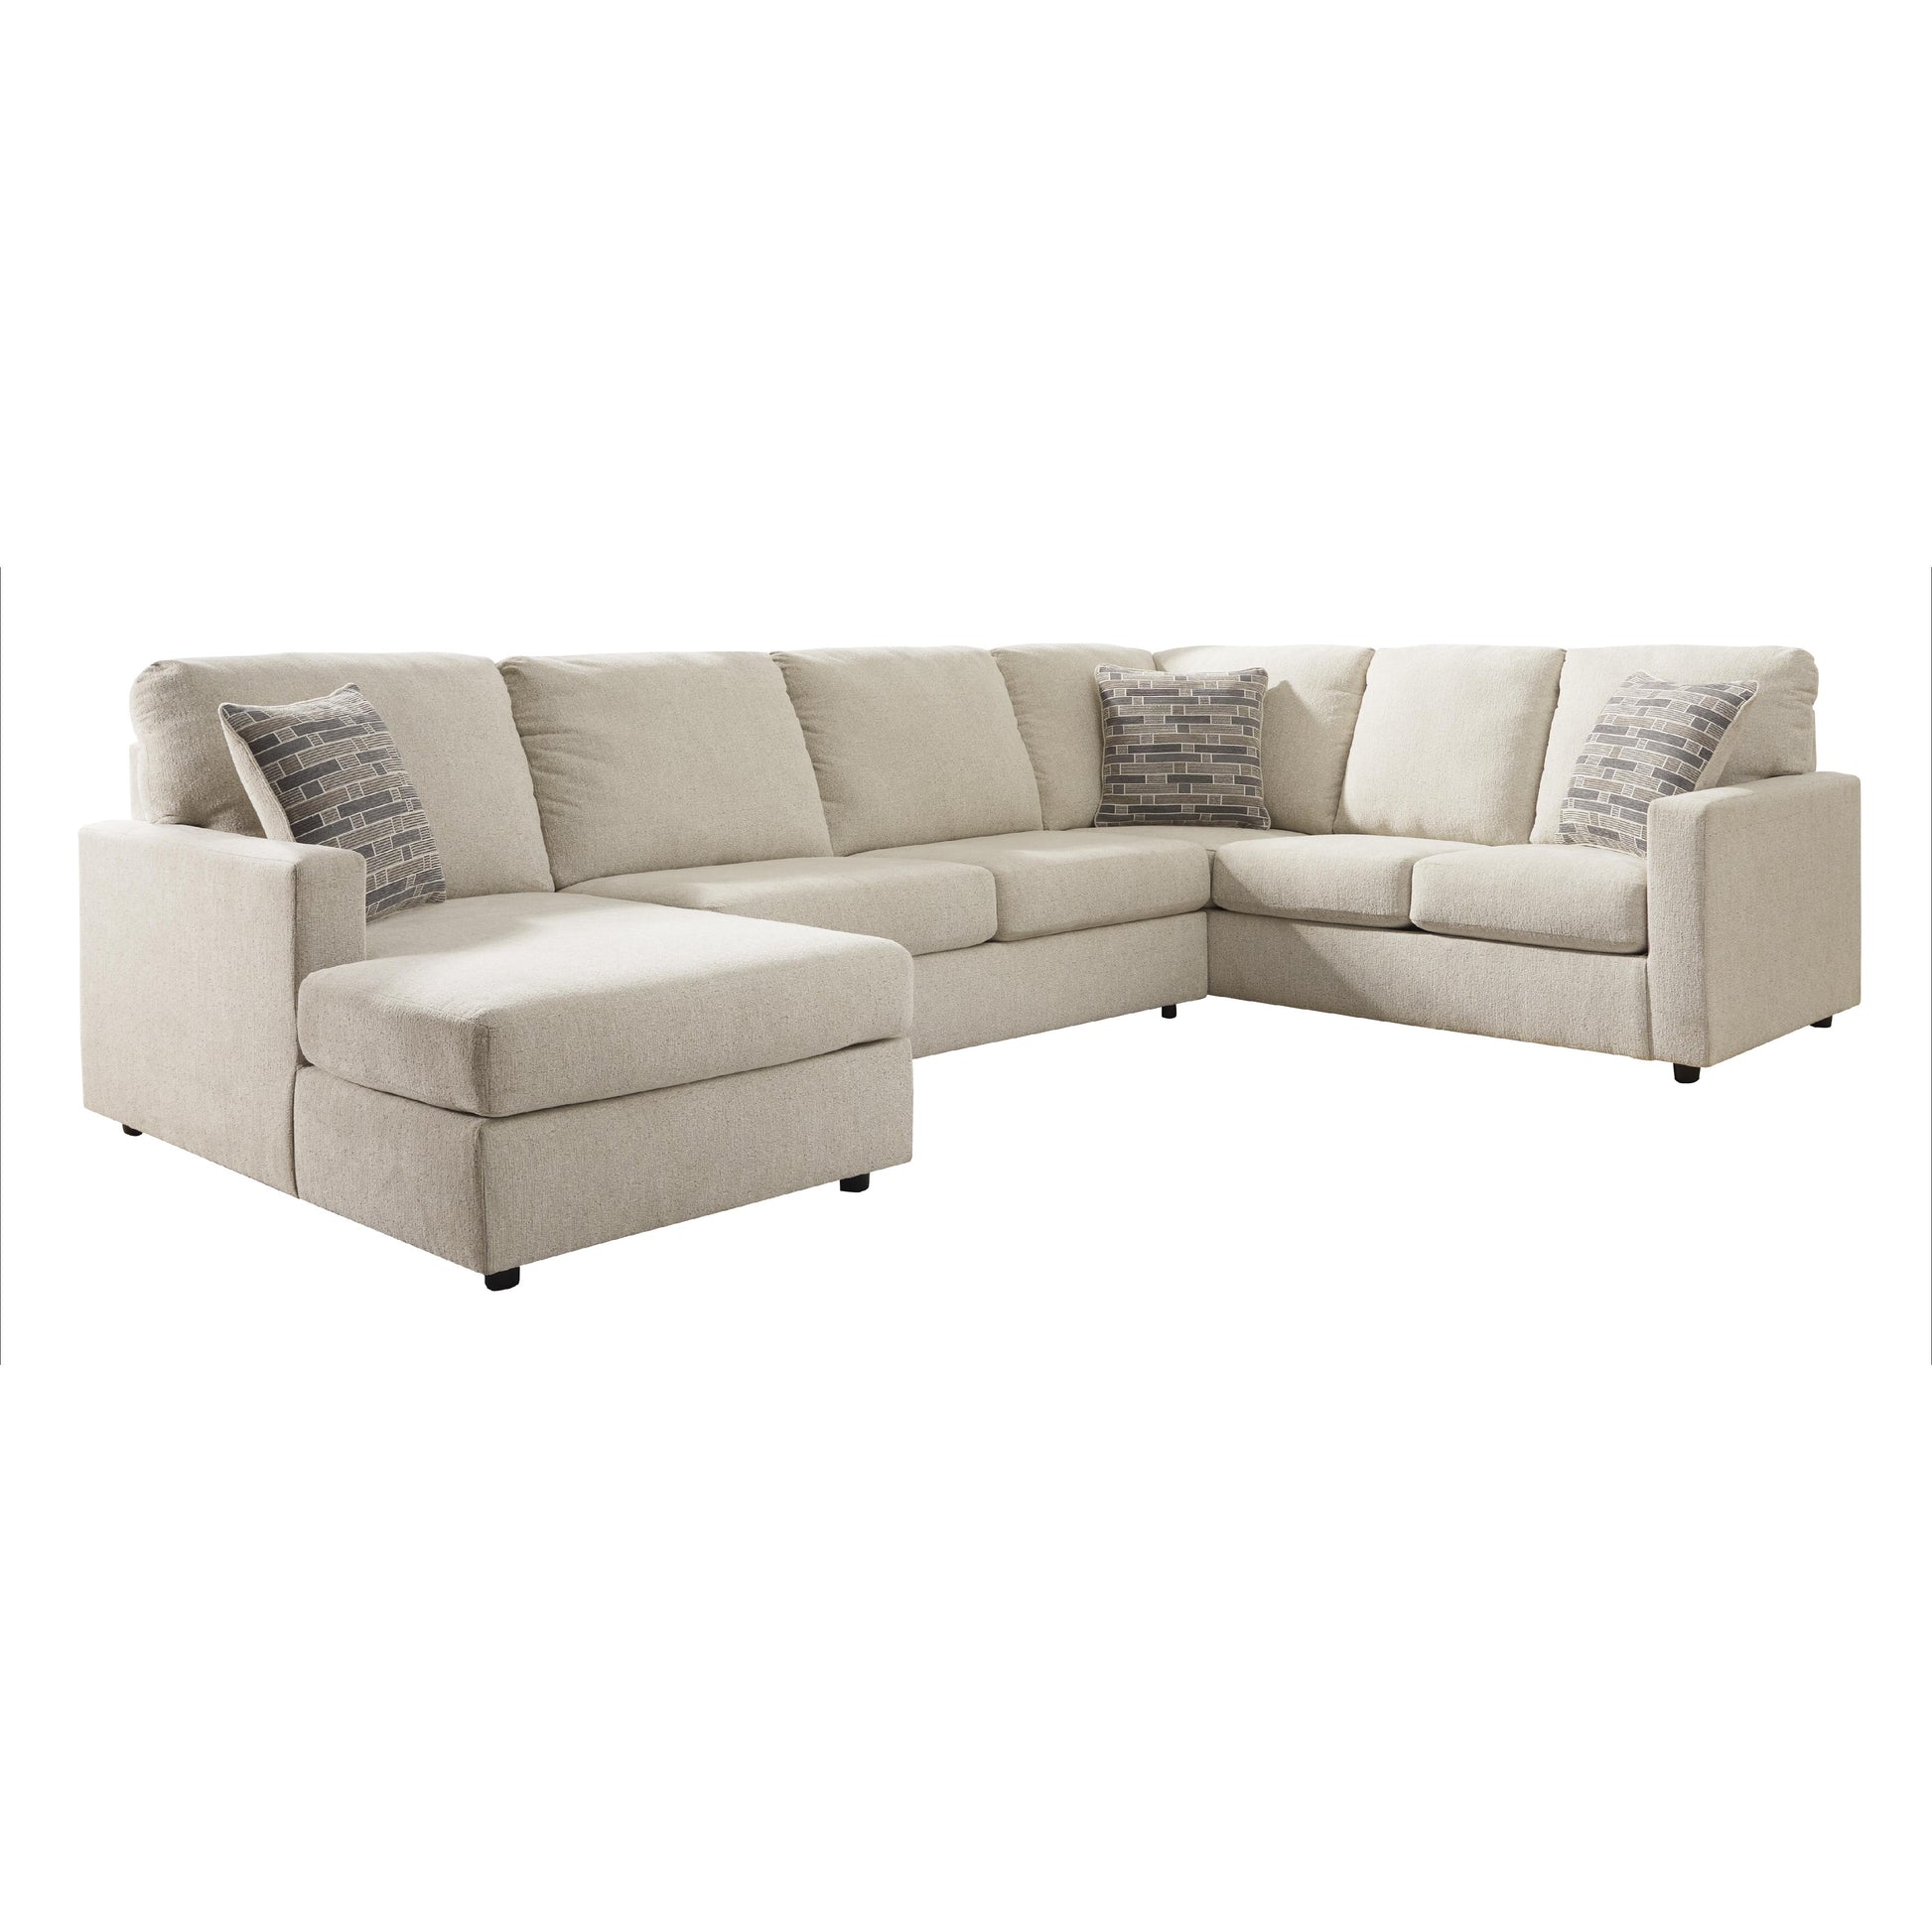 Signature Design by Ashley Edenfield Fabric 3 pc Sectional 2900416/2900434/2900449 IMAGE 1